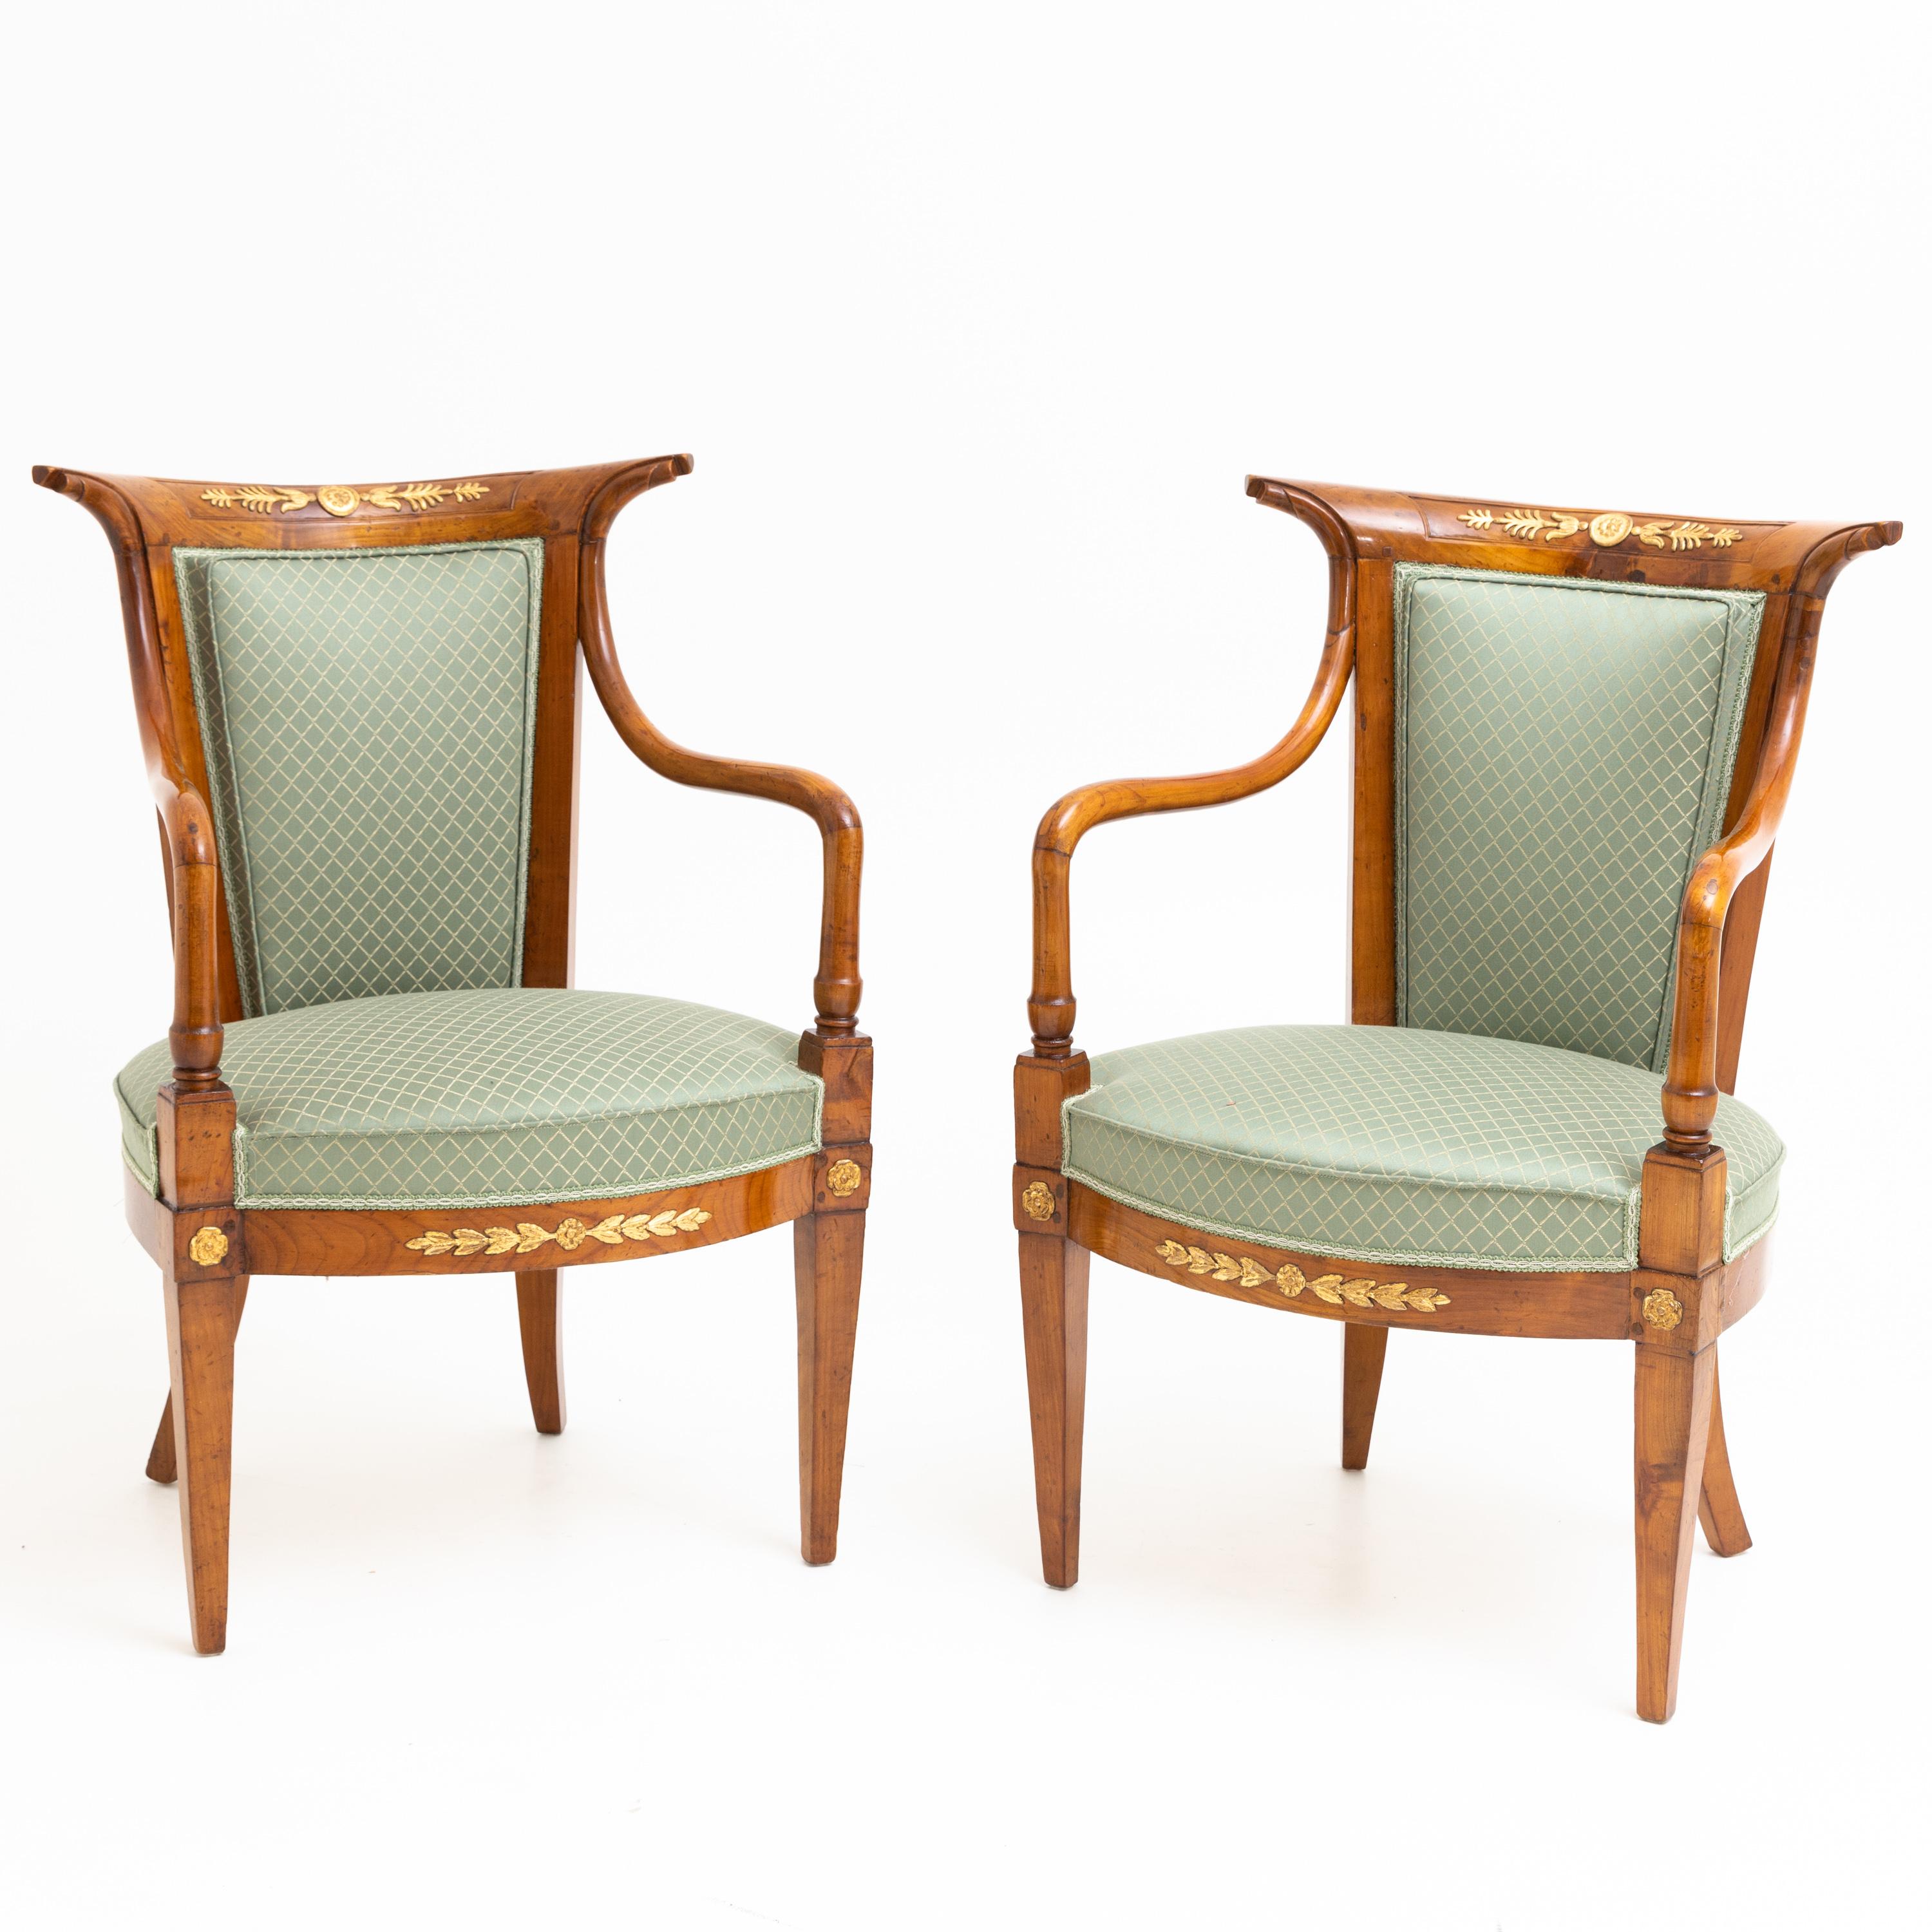 Pair of Italian cherry armchairs with trapezoidal, flared backrests standing on tapered or sabre legs. The elegantly curved armrests lead into the pointed backrests. There and on the frame decorated with stuccoed, gilded leaf and rosette decoration.